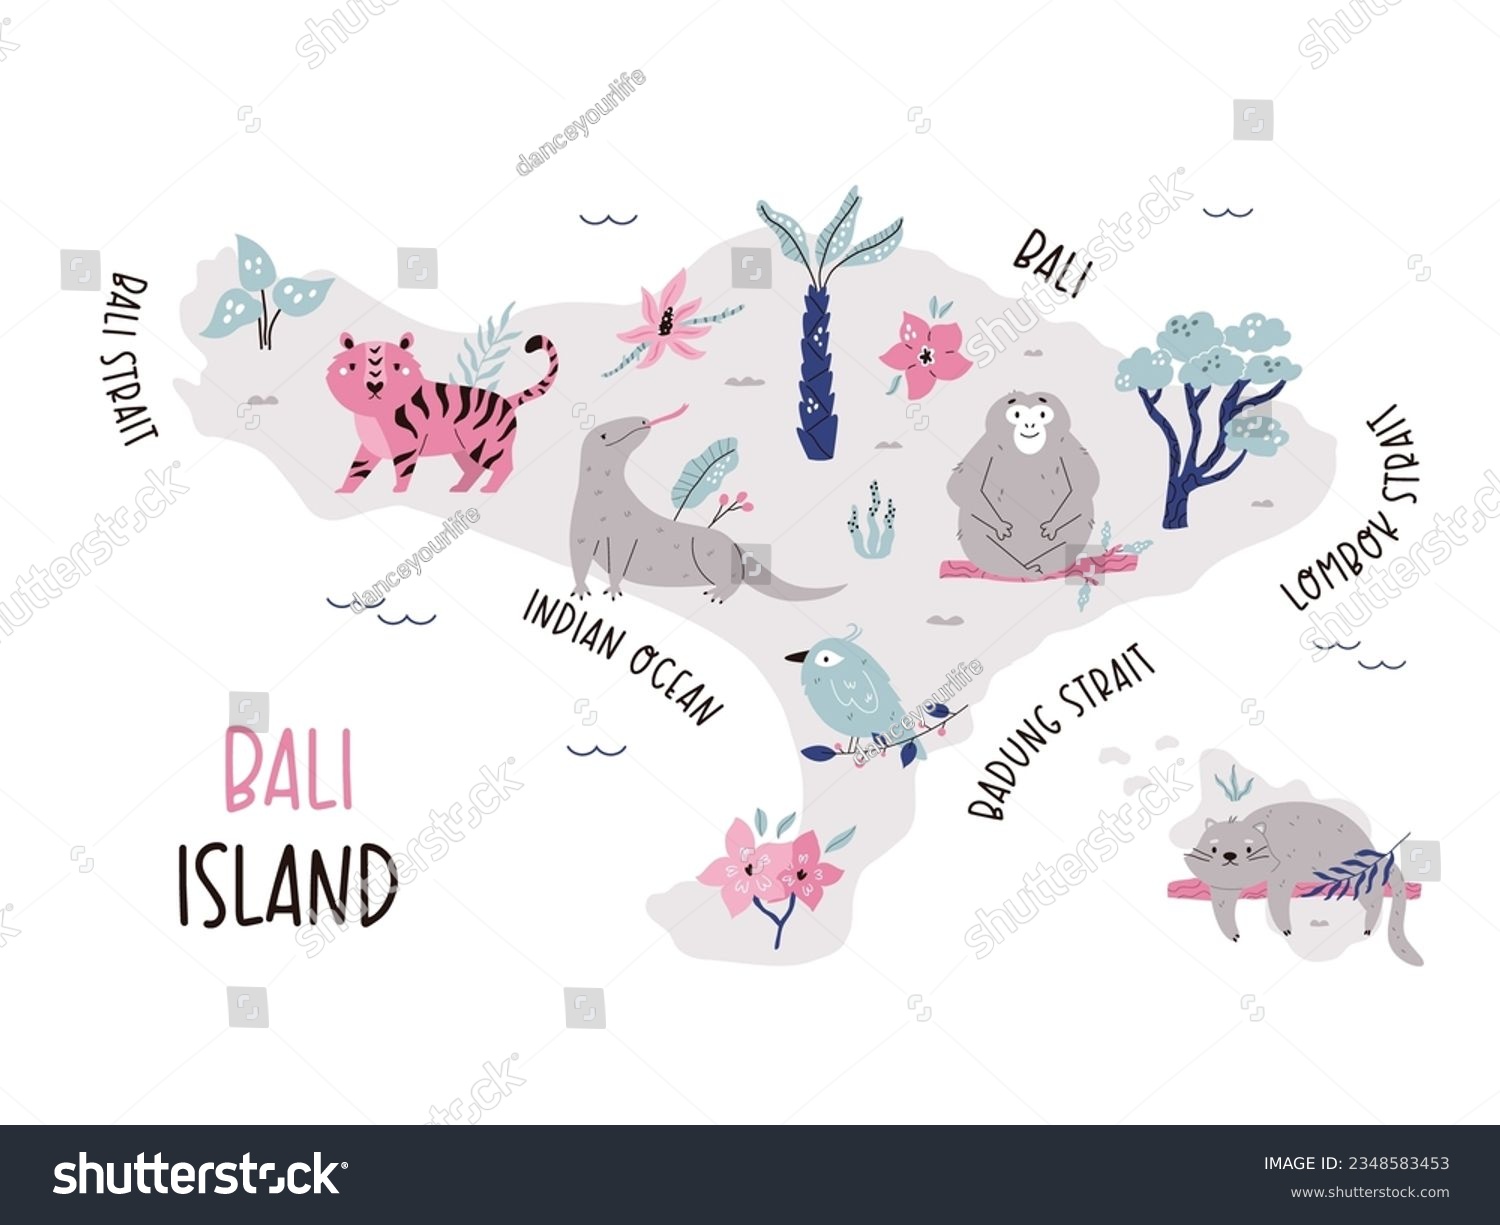 SVG of Bali hand drawn map with funny animals. Cartoon illustration of Indonesian island. Travel poster, postcard, banner, design svg